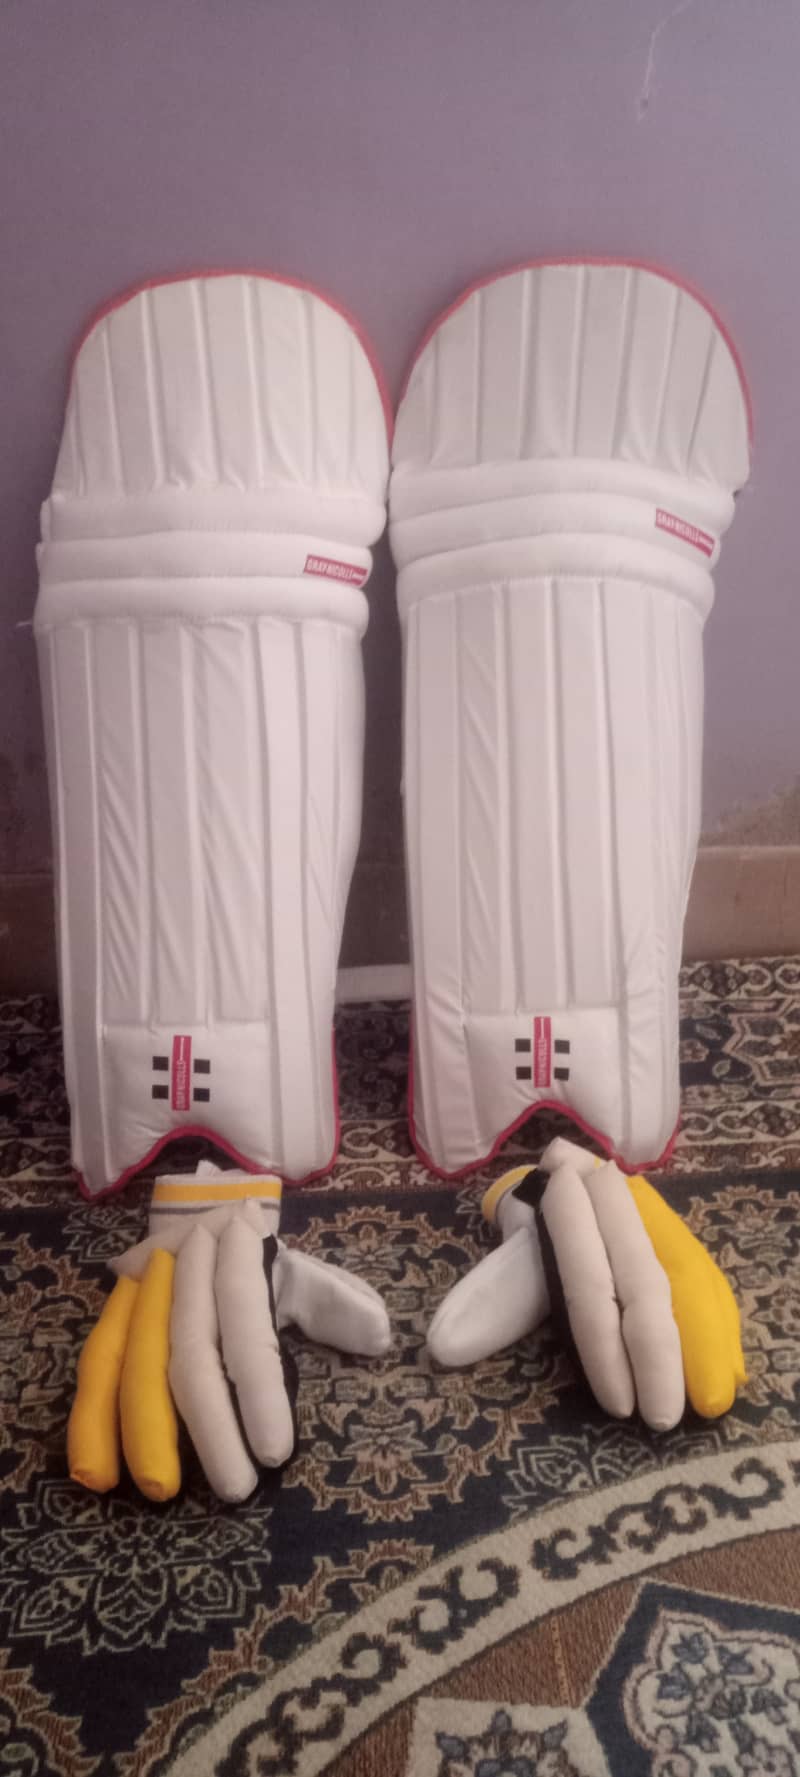 Cricket pad & gloves with bag 7